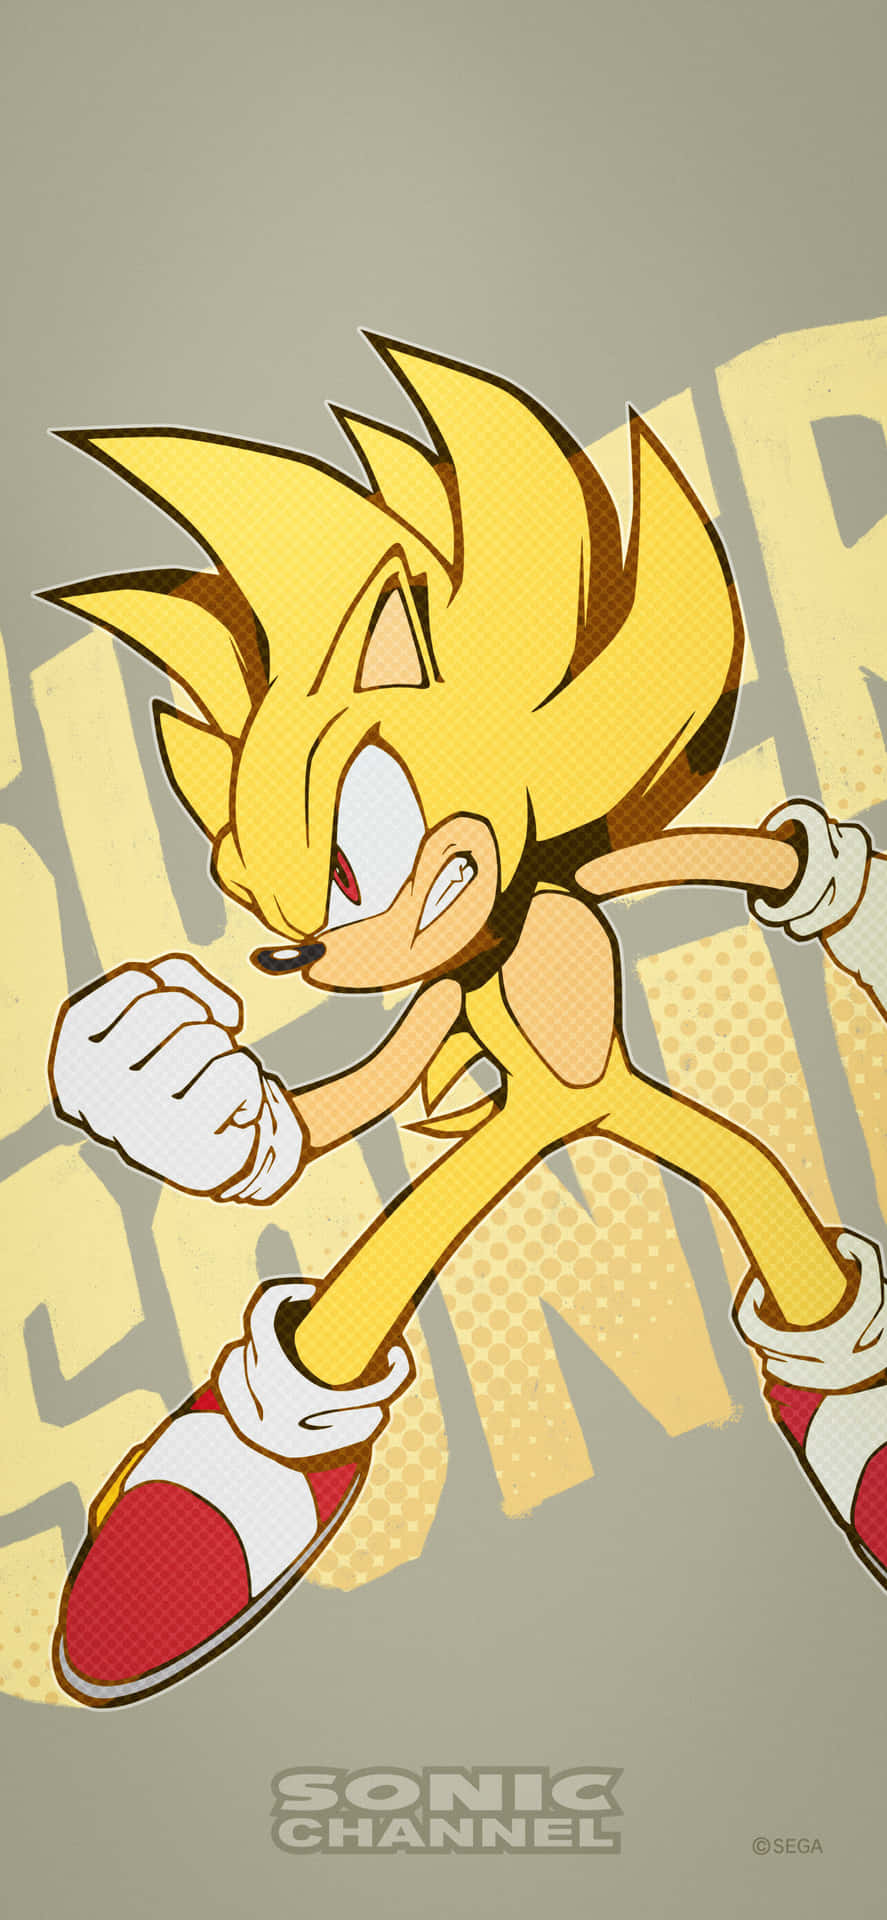 Introducing Super Sonic, the world's fastest hedgehog. Wallpaper